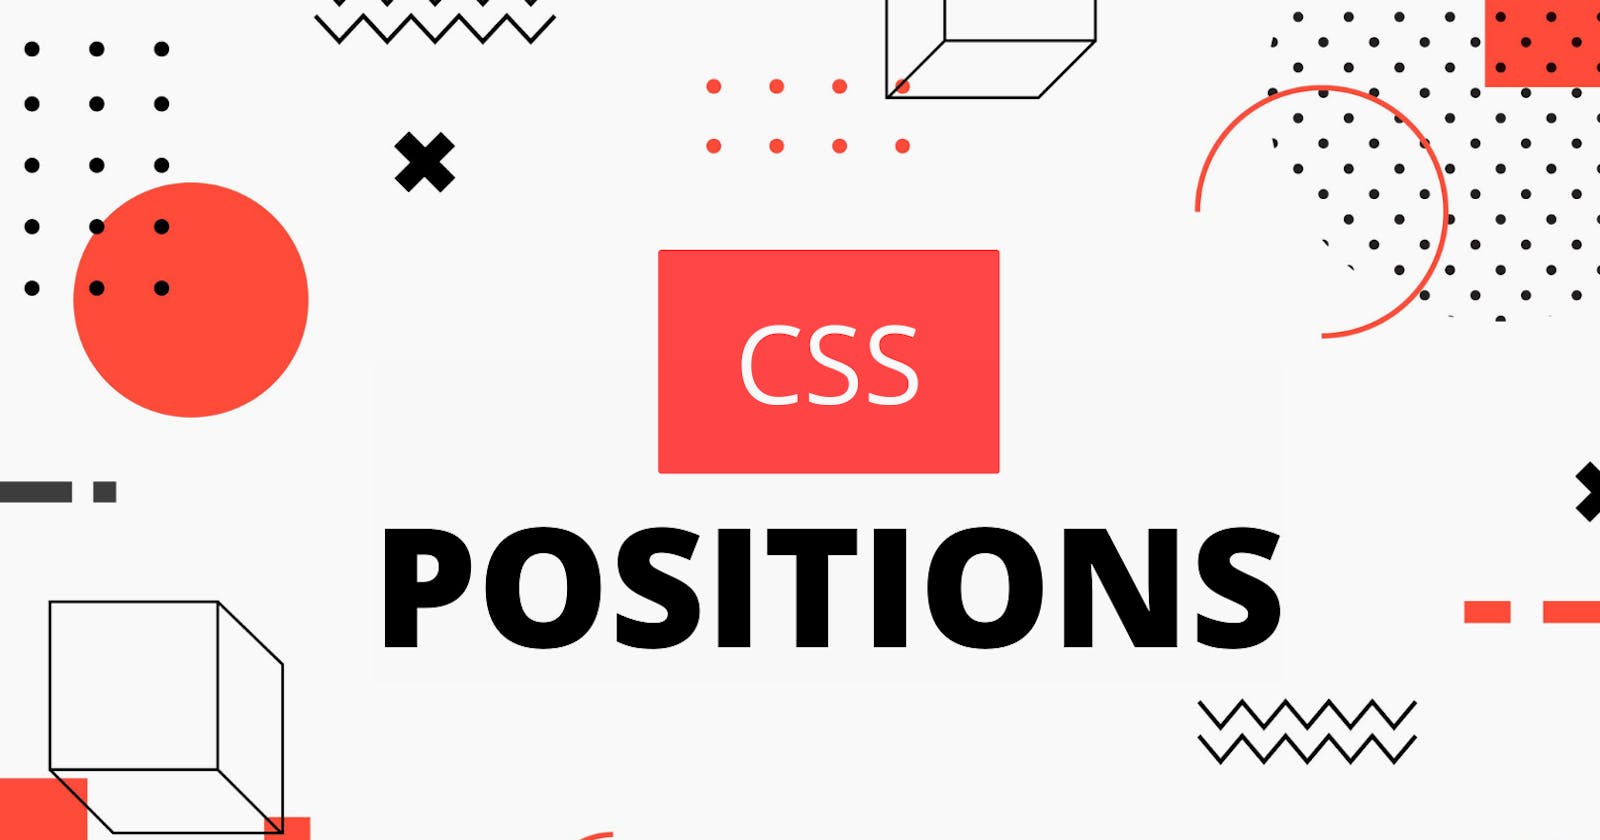 CSS Positioning - Basic guide to position elements for better styling.